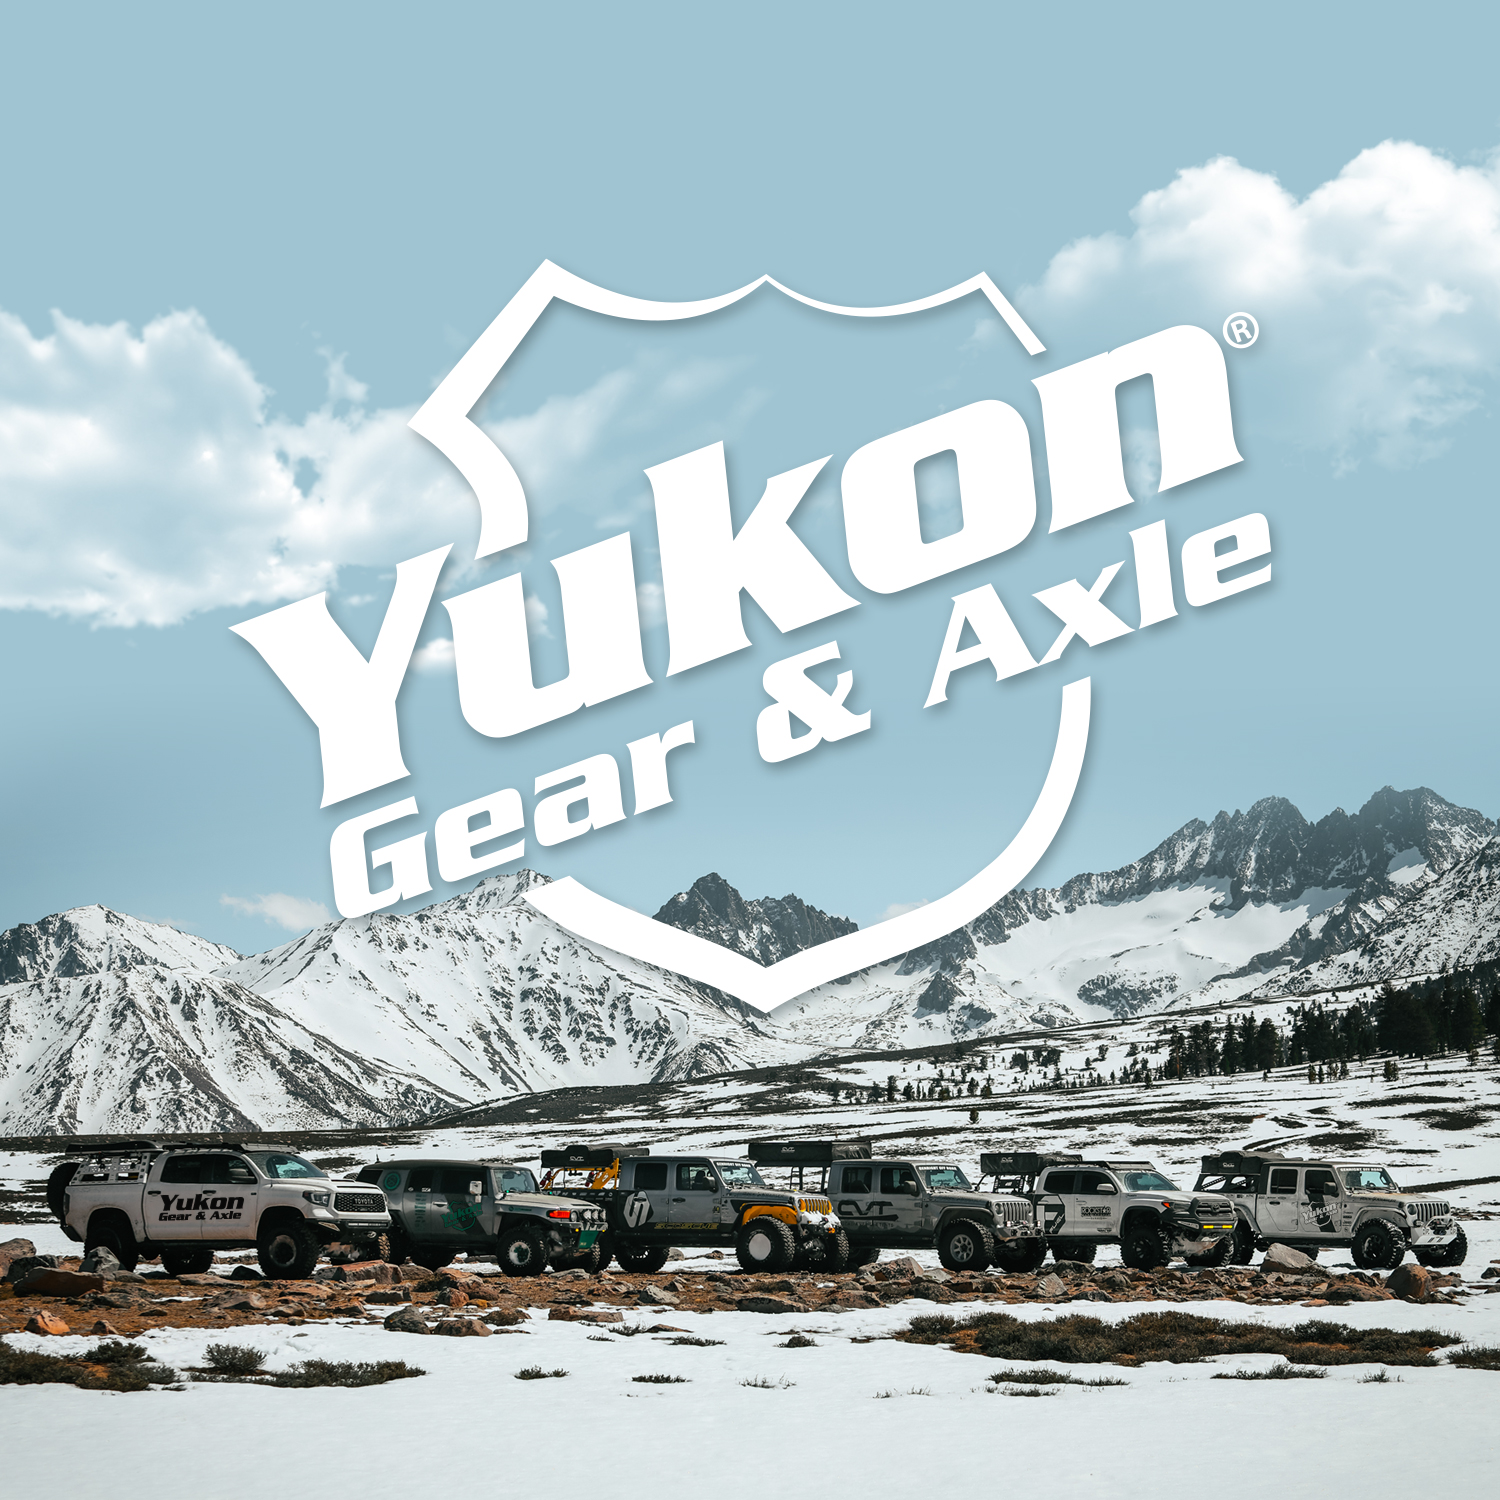 Yukon extra HD yoke for Chrysler 8.75" with 29 spline pinion and a 1350 u-joint 